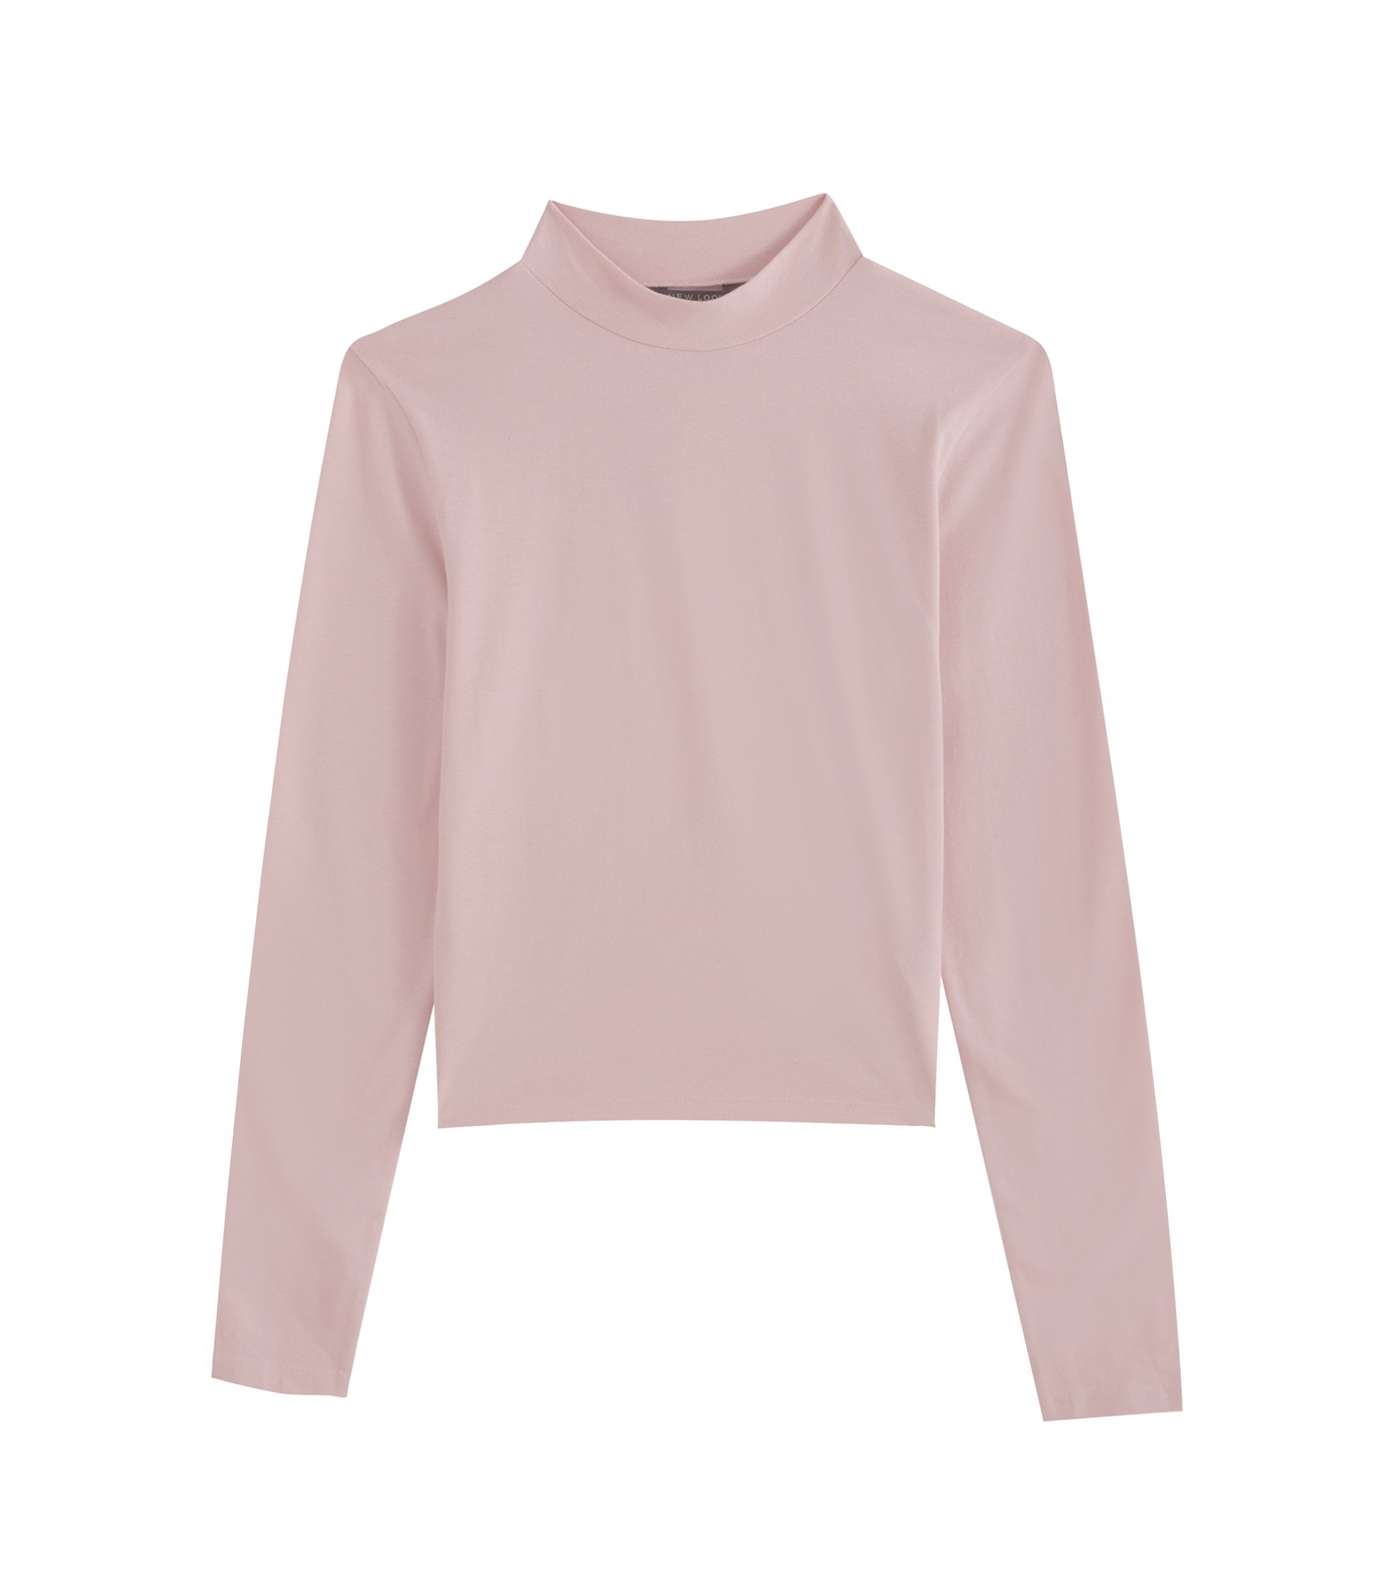 Girls Pale Pink High Neck Long Sleeve Top Image 5